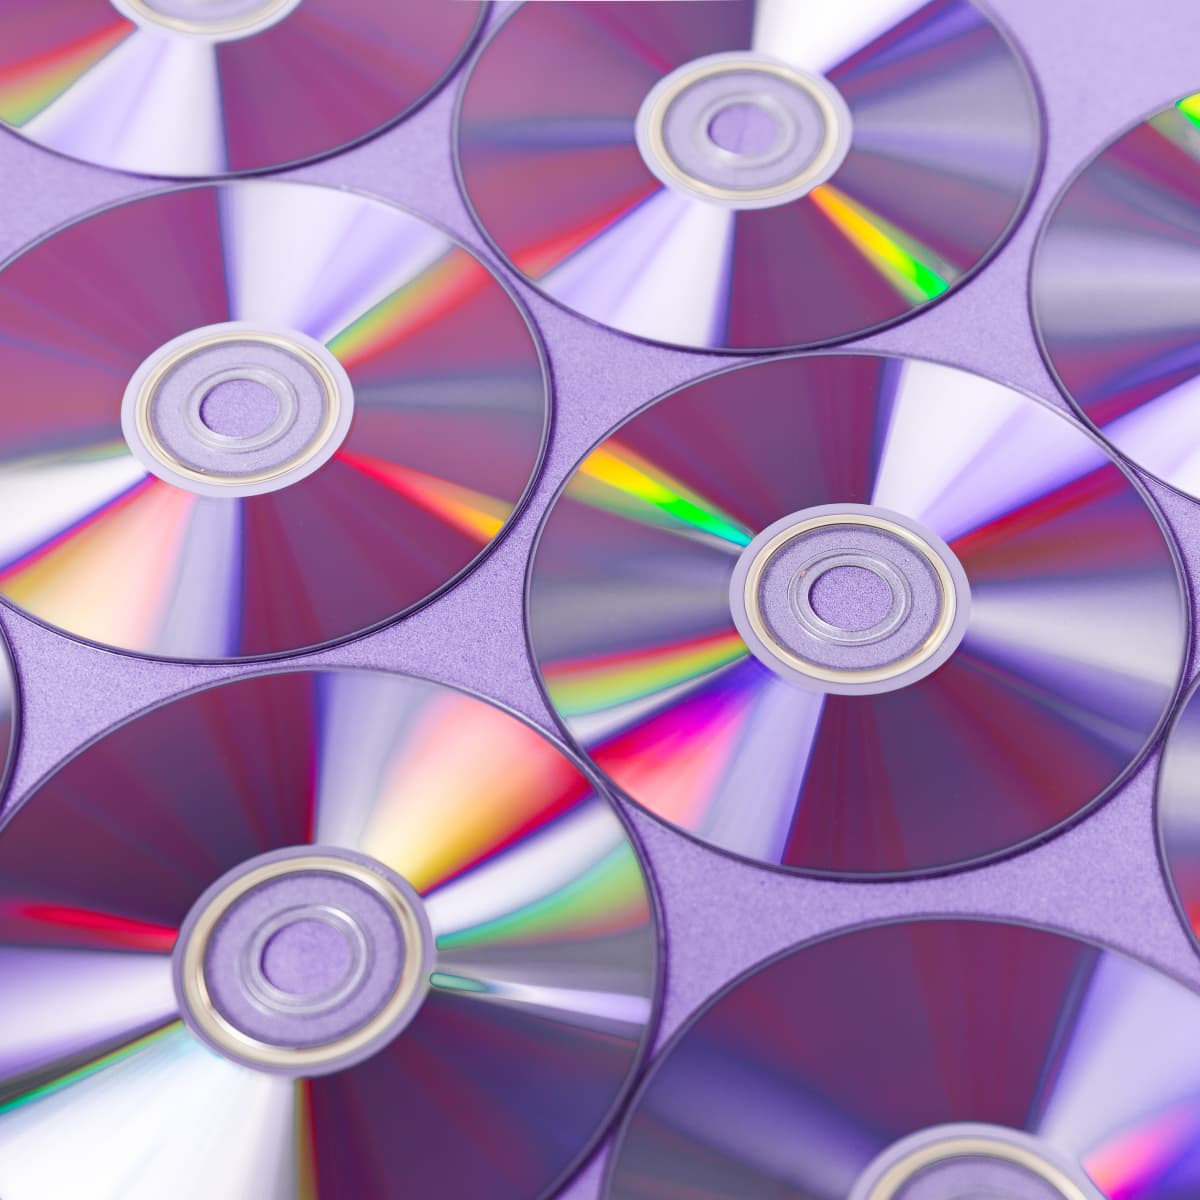 CDs are back! Compact disc sales just rose for the first time in 17 years